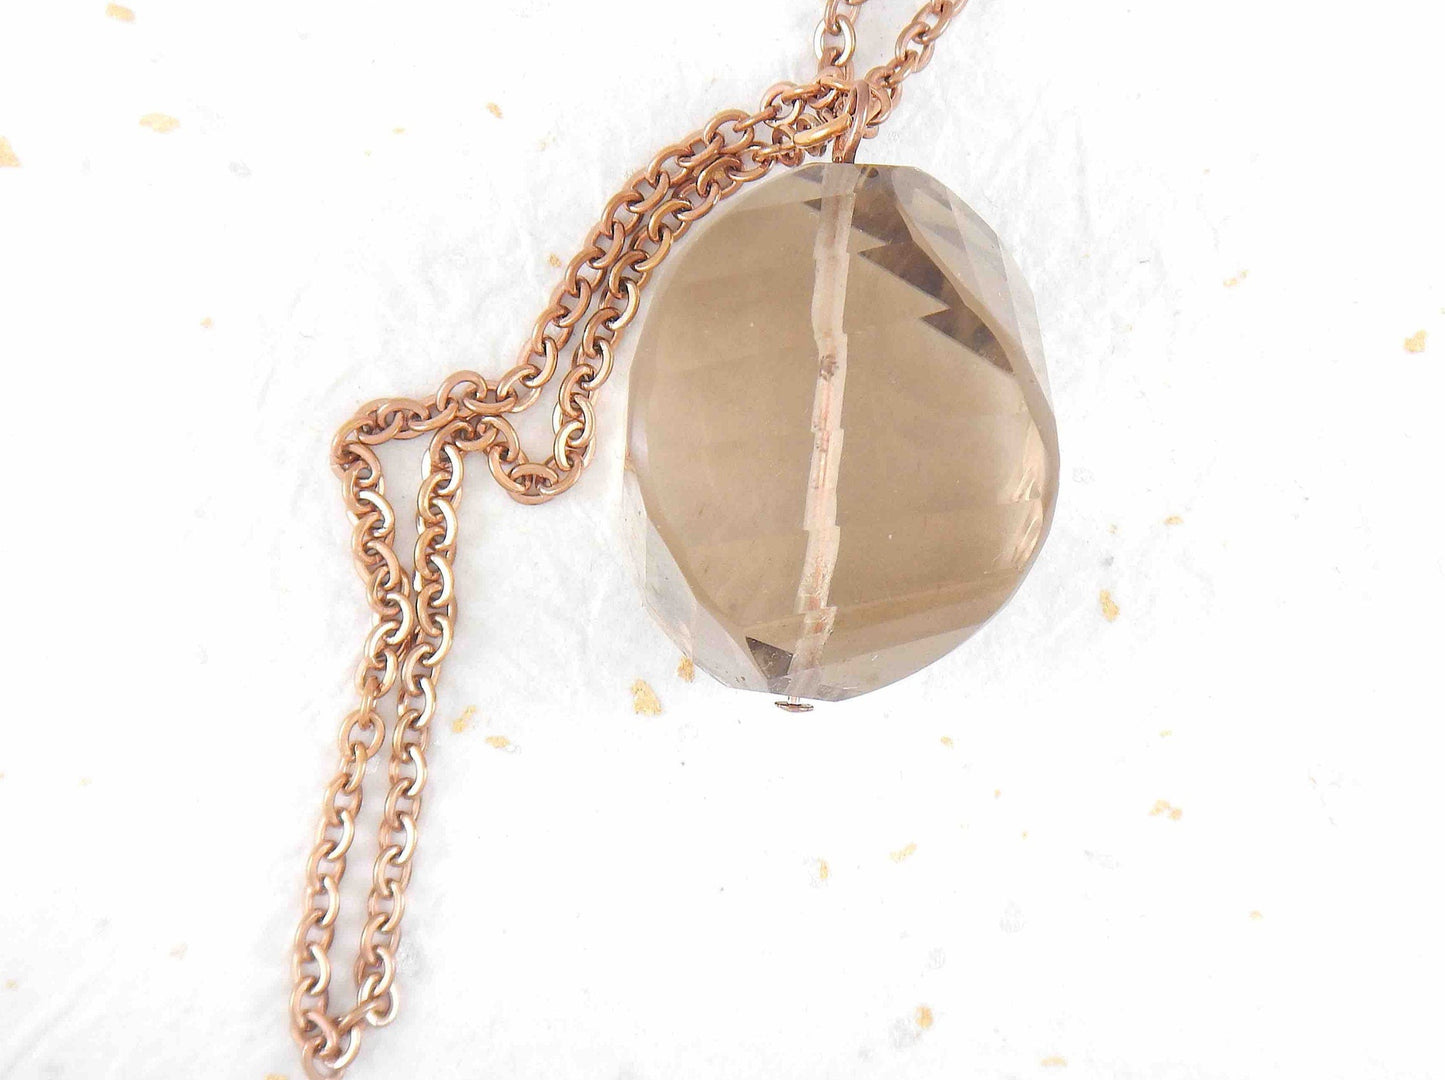 31-inch necklace with smoky quartz stone pendant, 4 profiled and faceted faces, rose gold-toned stainless steel chain